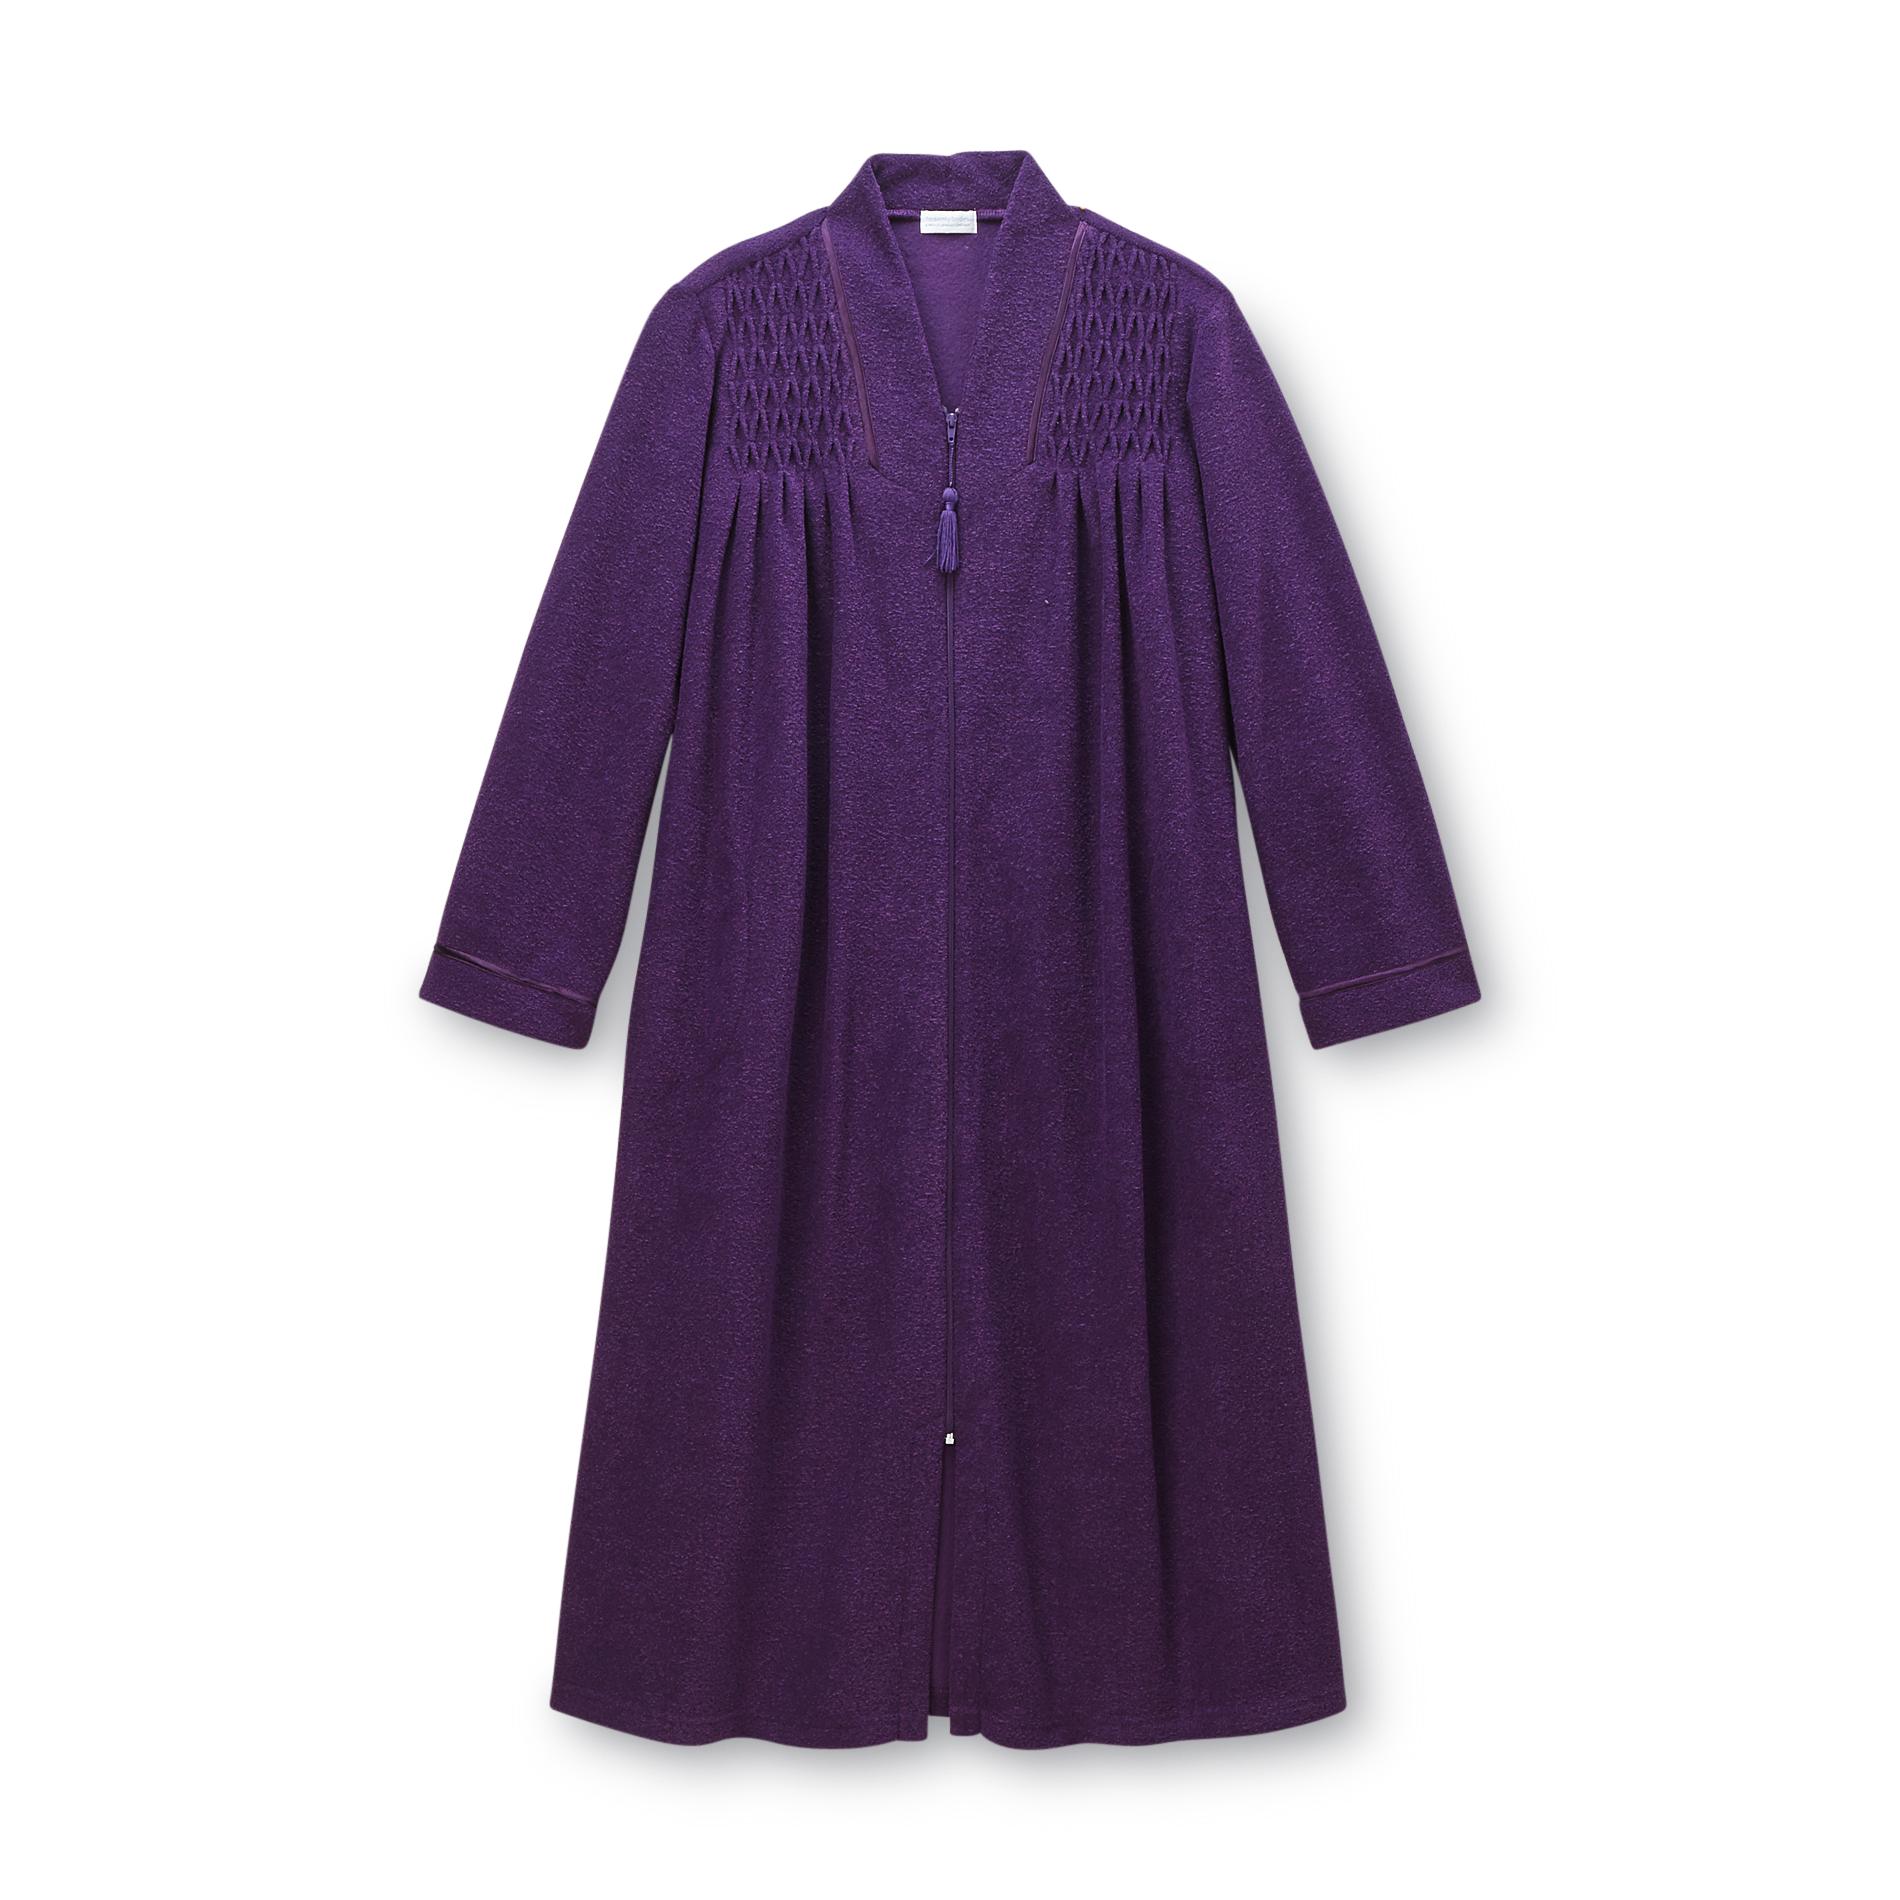 Heavenly Bodies by Miss Elaine Women's Fleece-Lined French Terry Robe